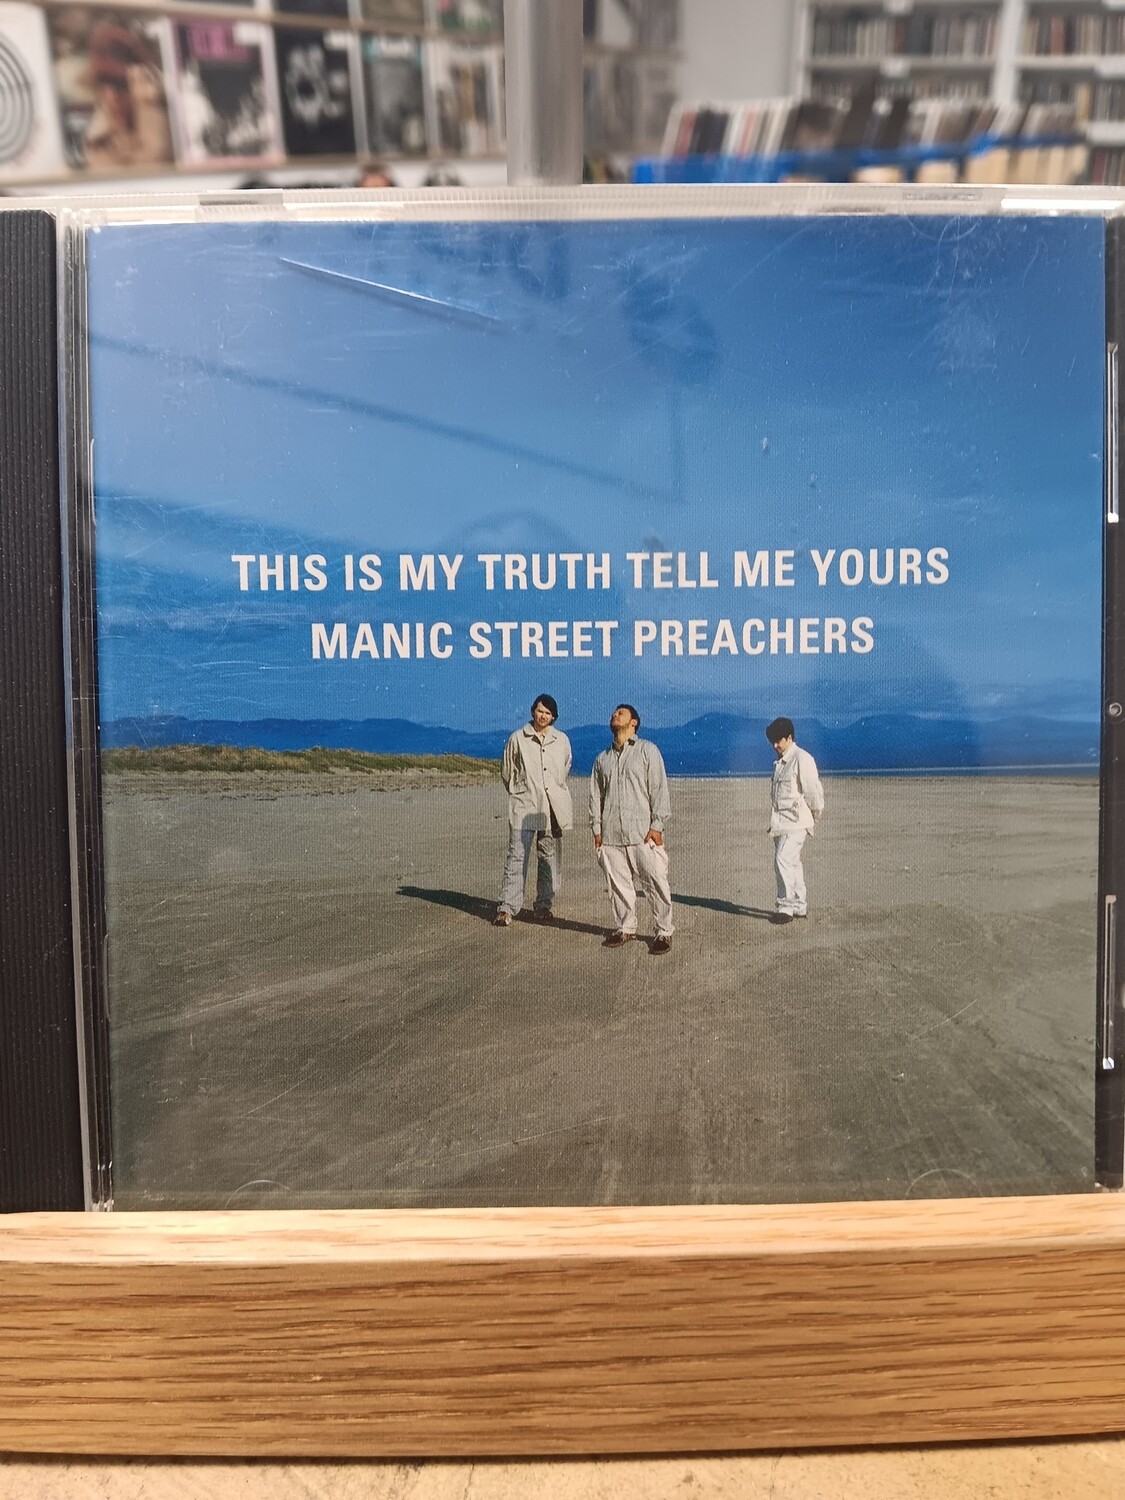 MANIC STREET PREACHERS - This is my truth tell me yours (CD)